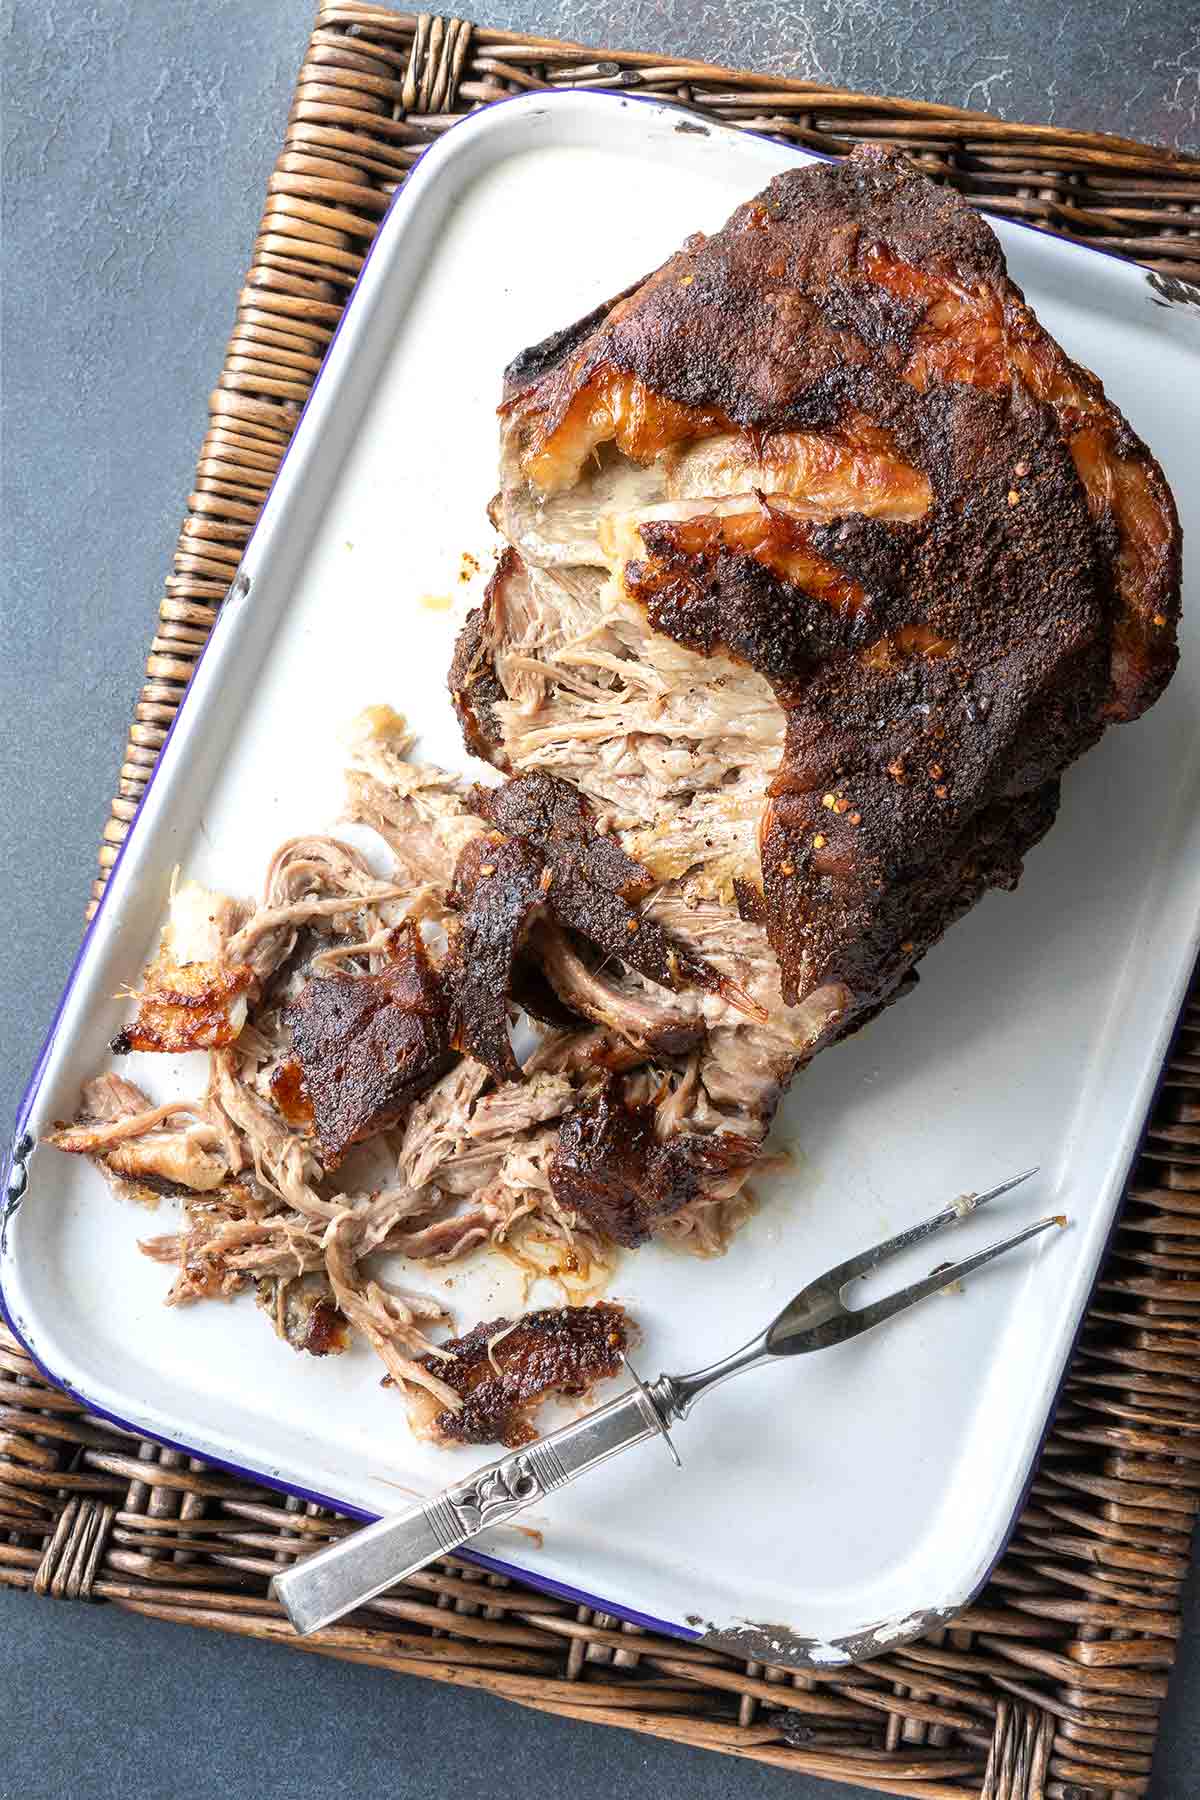 A partially shredded roast pork butt in a roasting pan with a fork nearby.